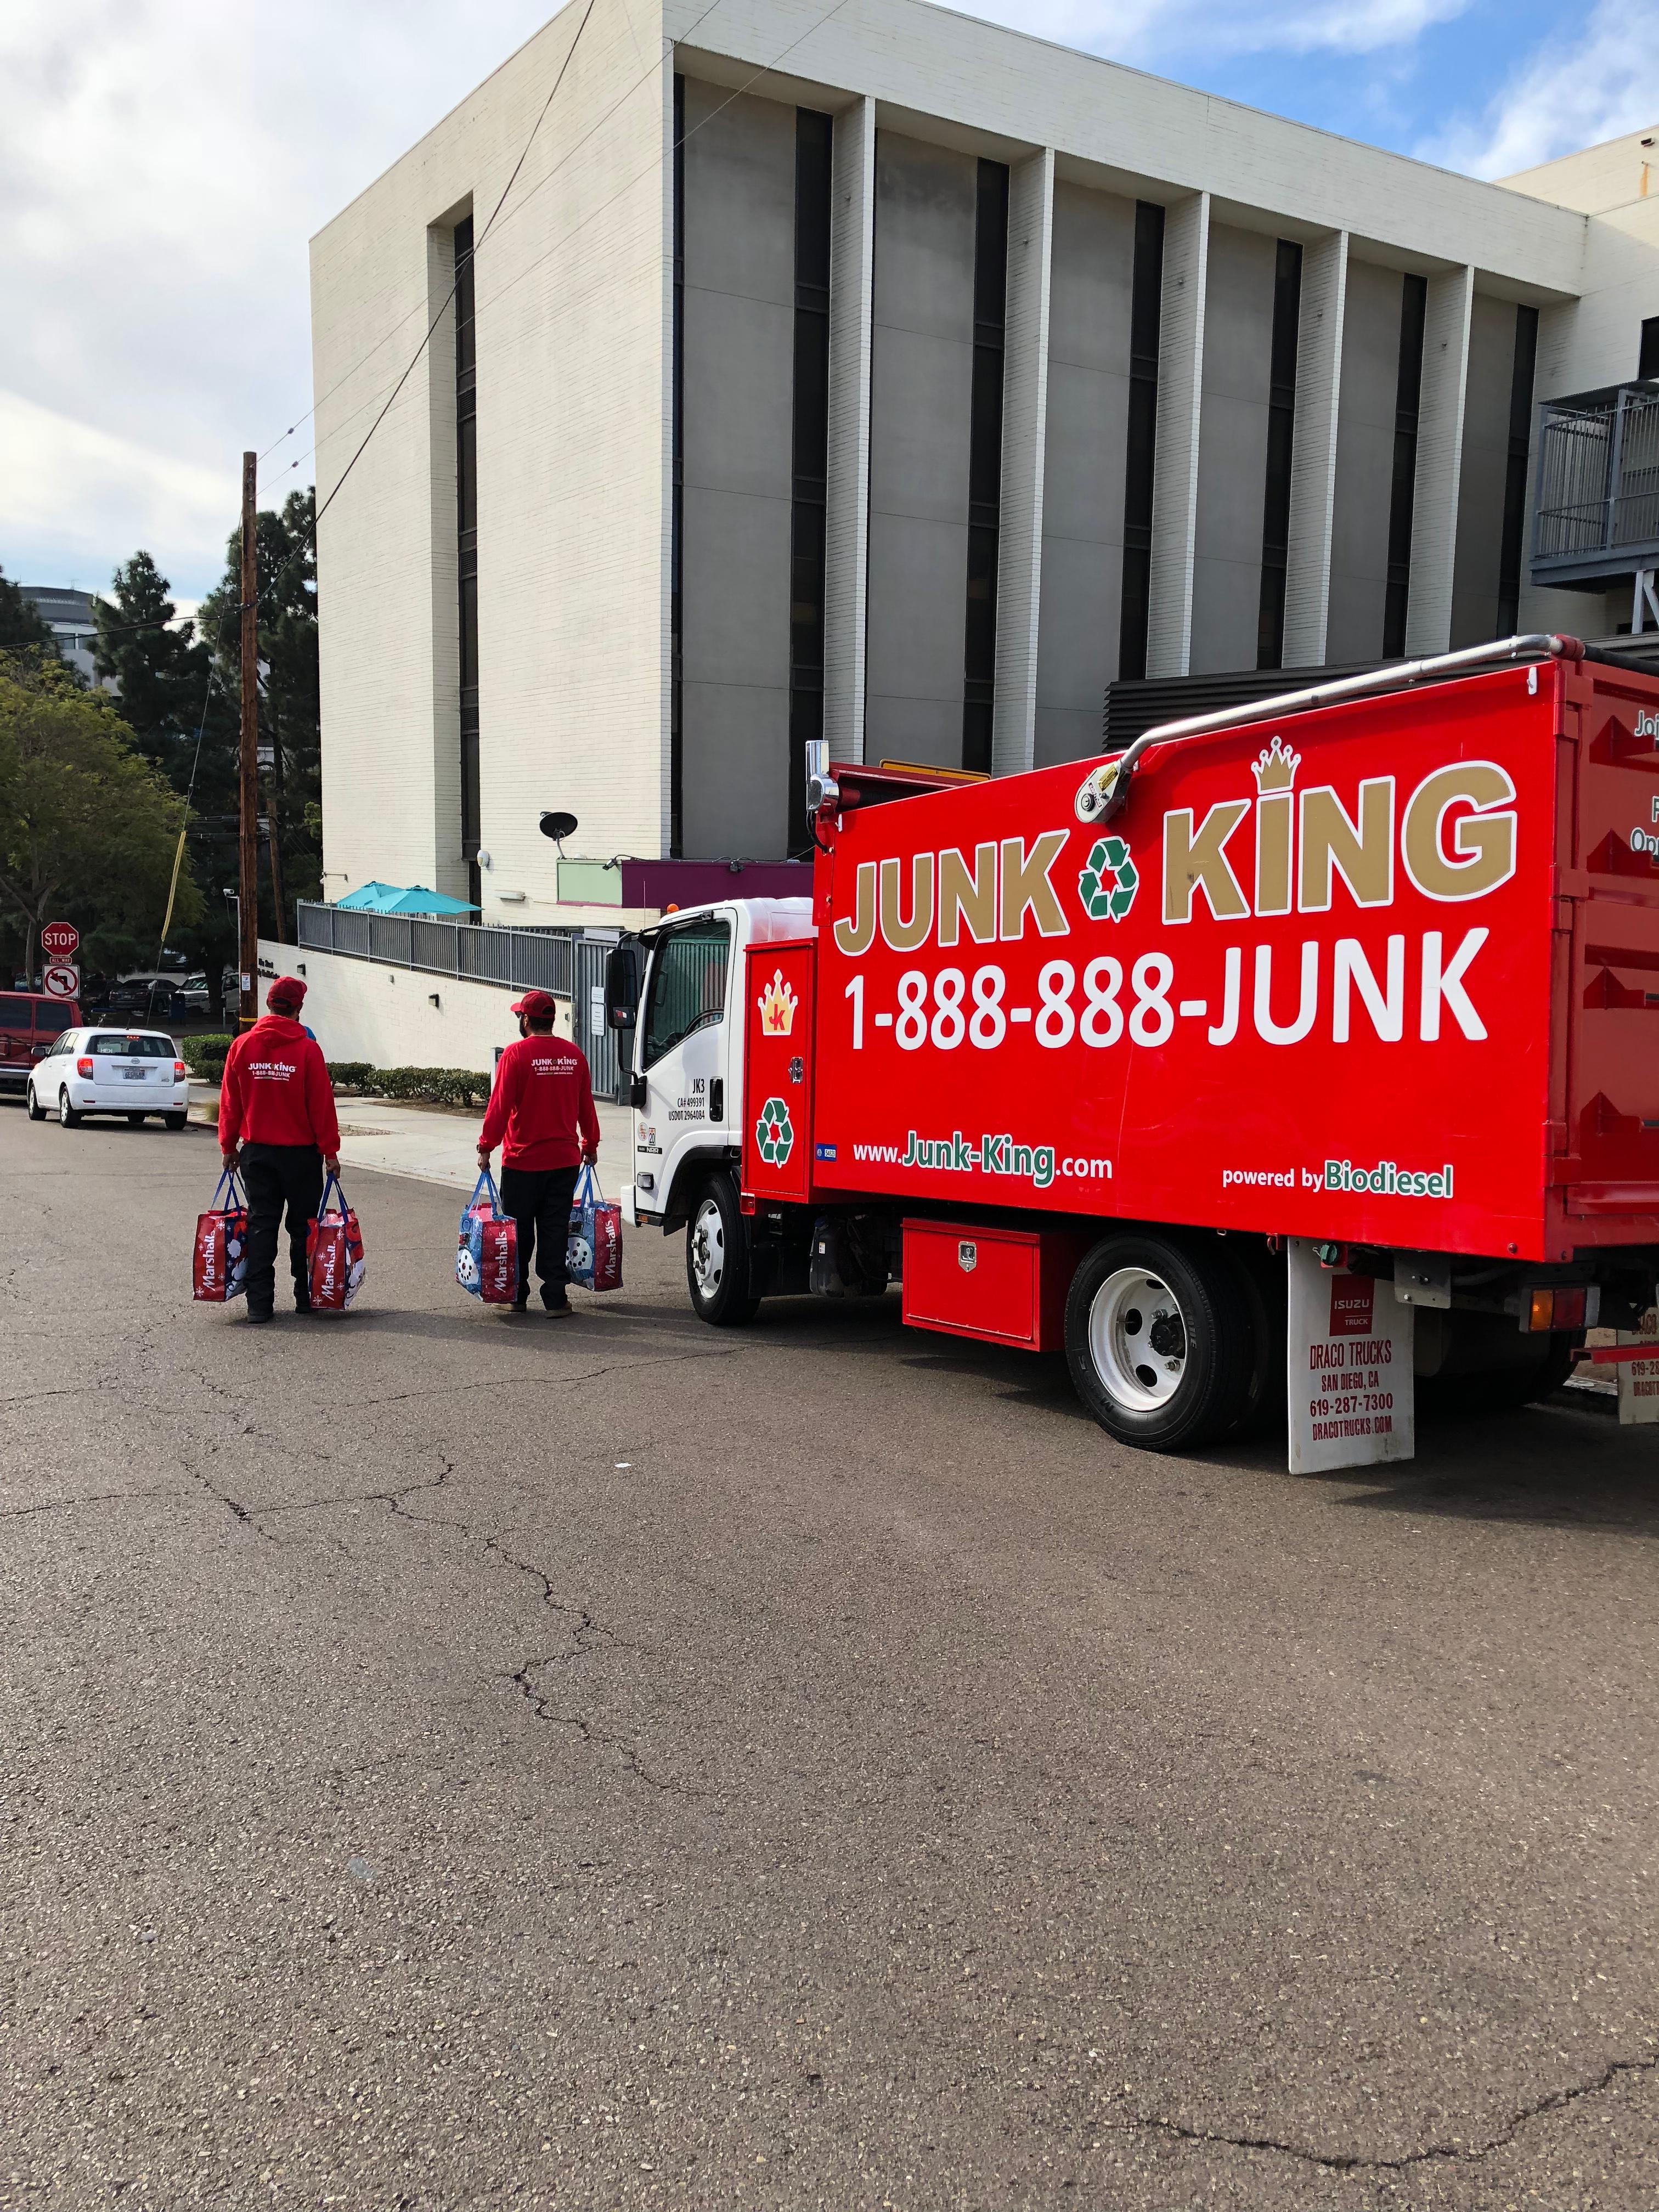 Our Junk King team giving back to the community.